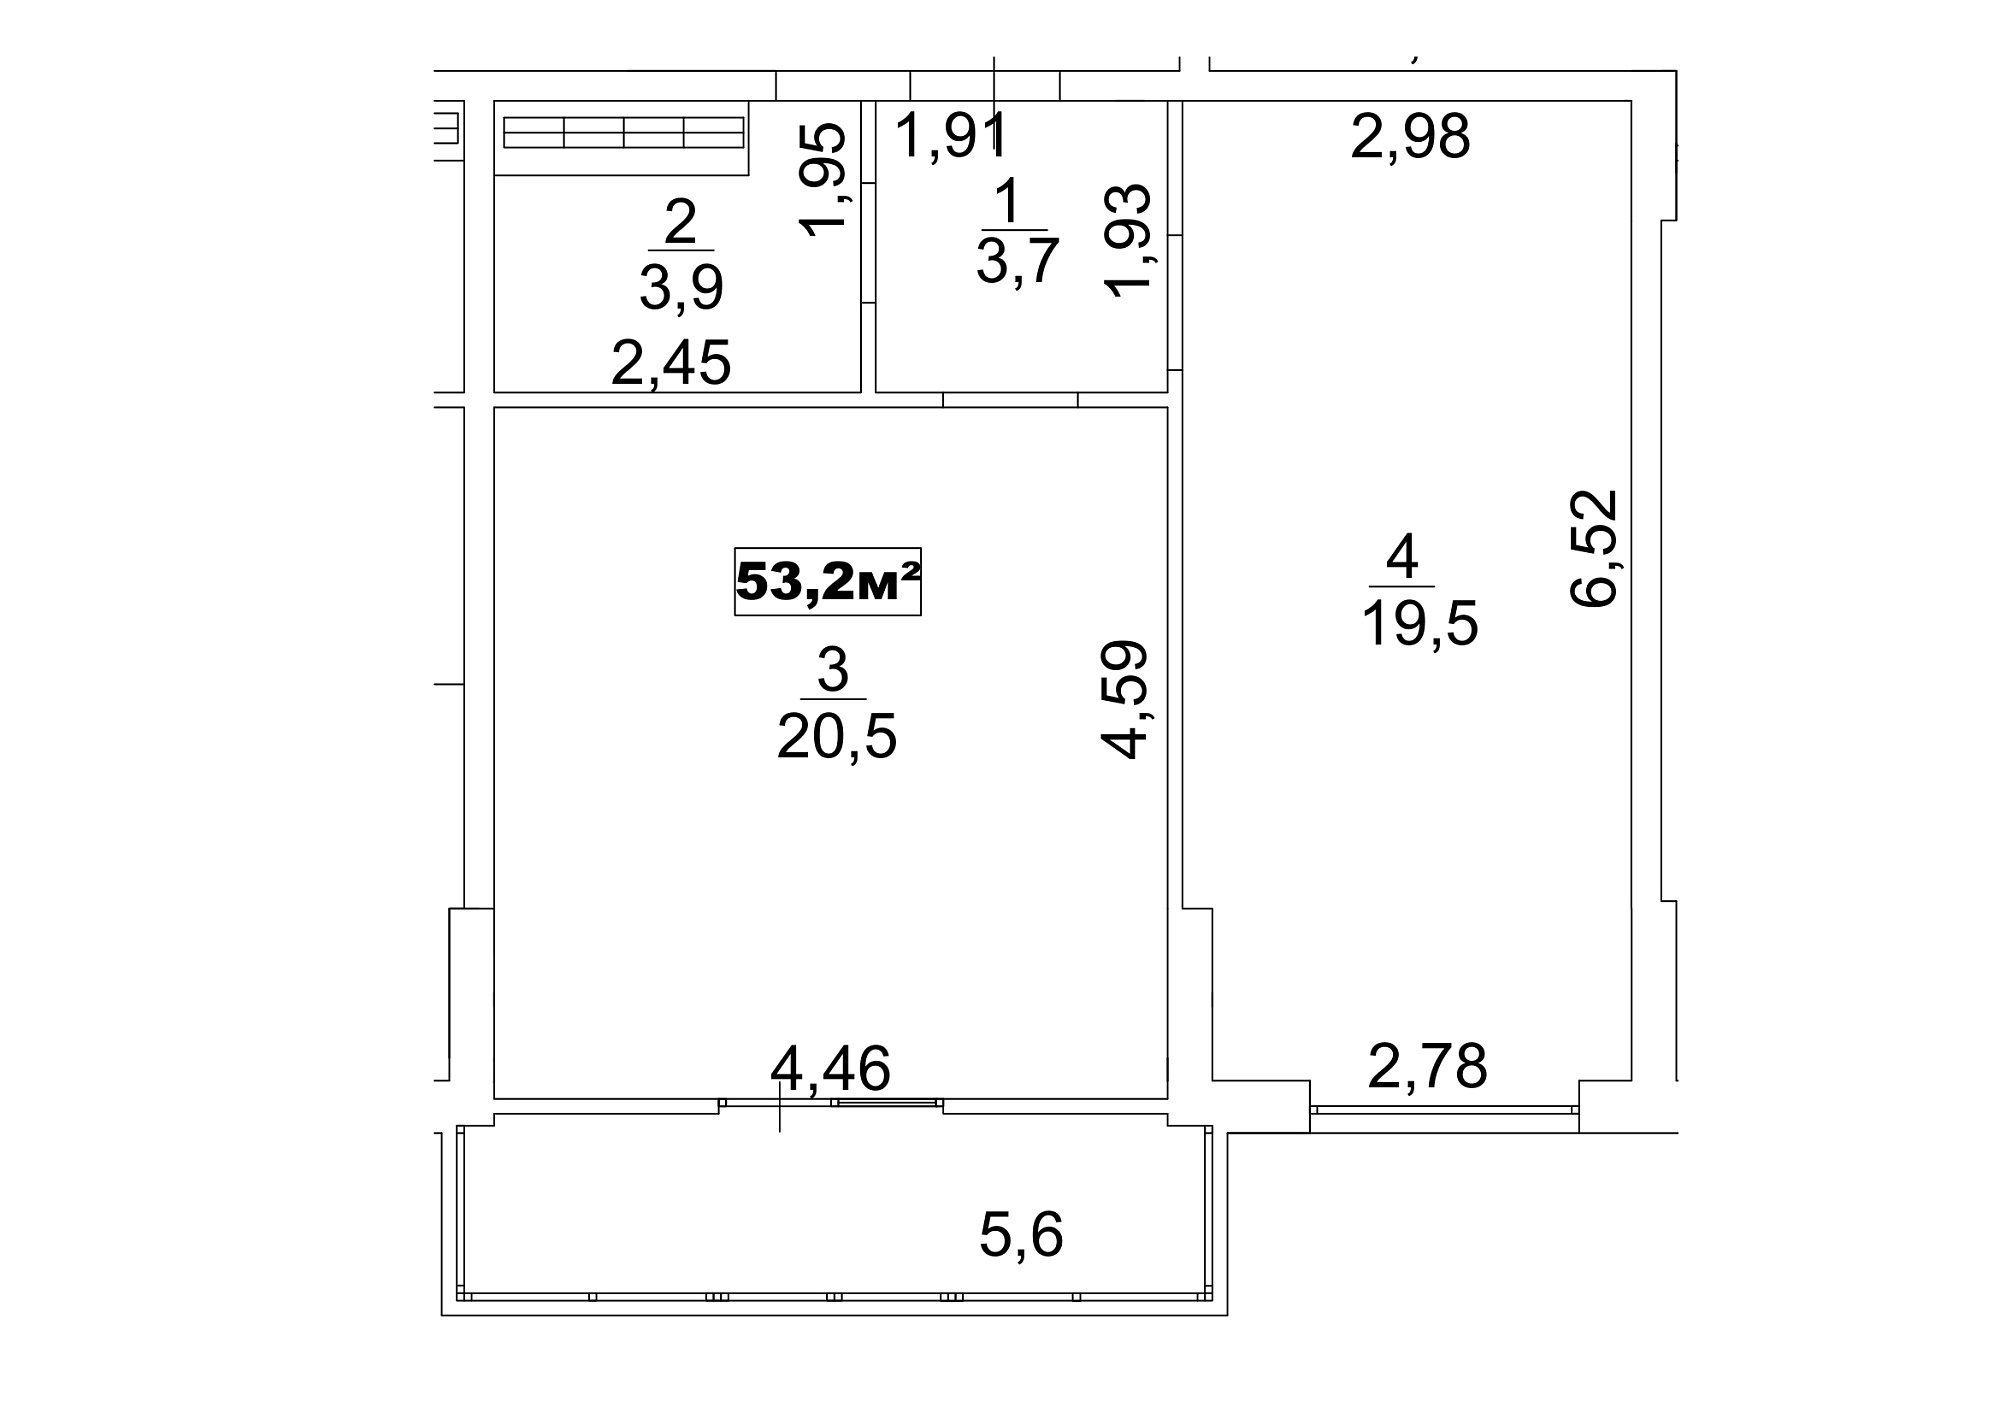 Planning 1-rm flats area 53.2m2, AB-13-05/00041.